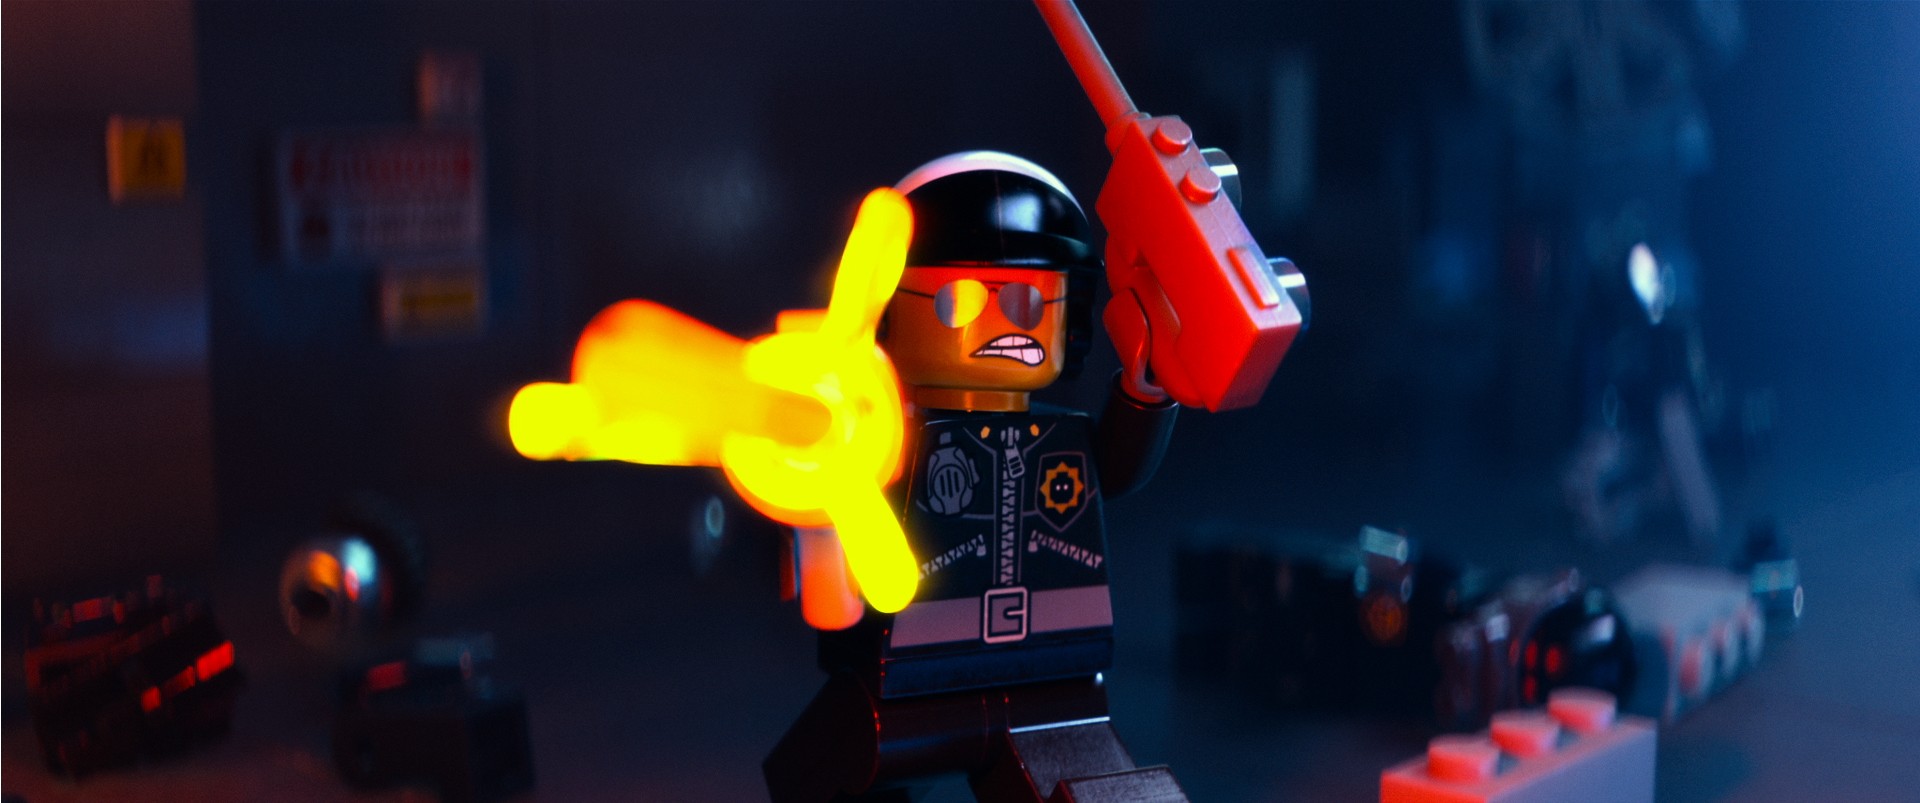 Bad Cop from Warner Bros. Pictures' The Lego Movie (2014)